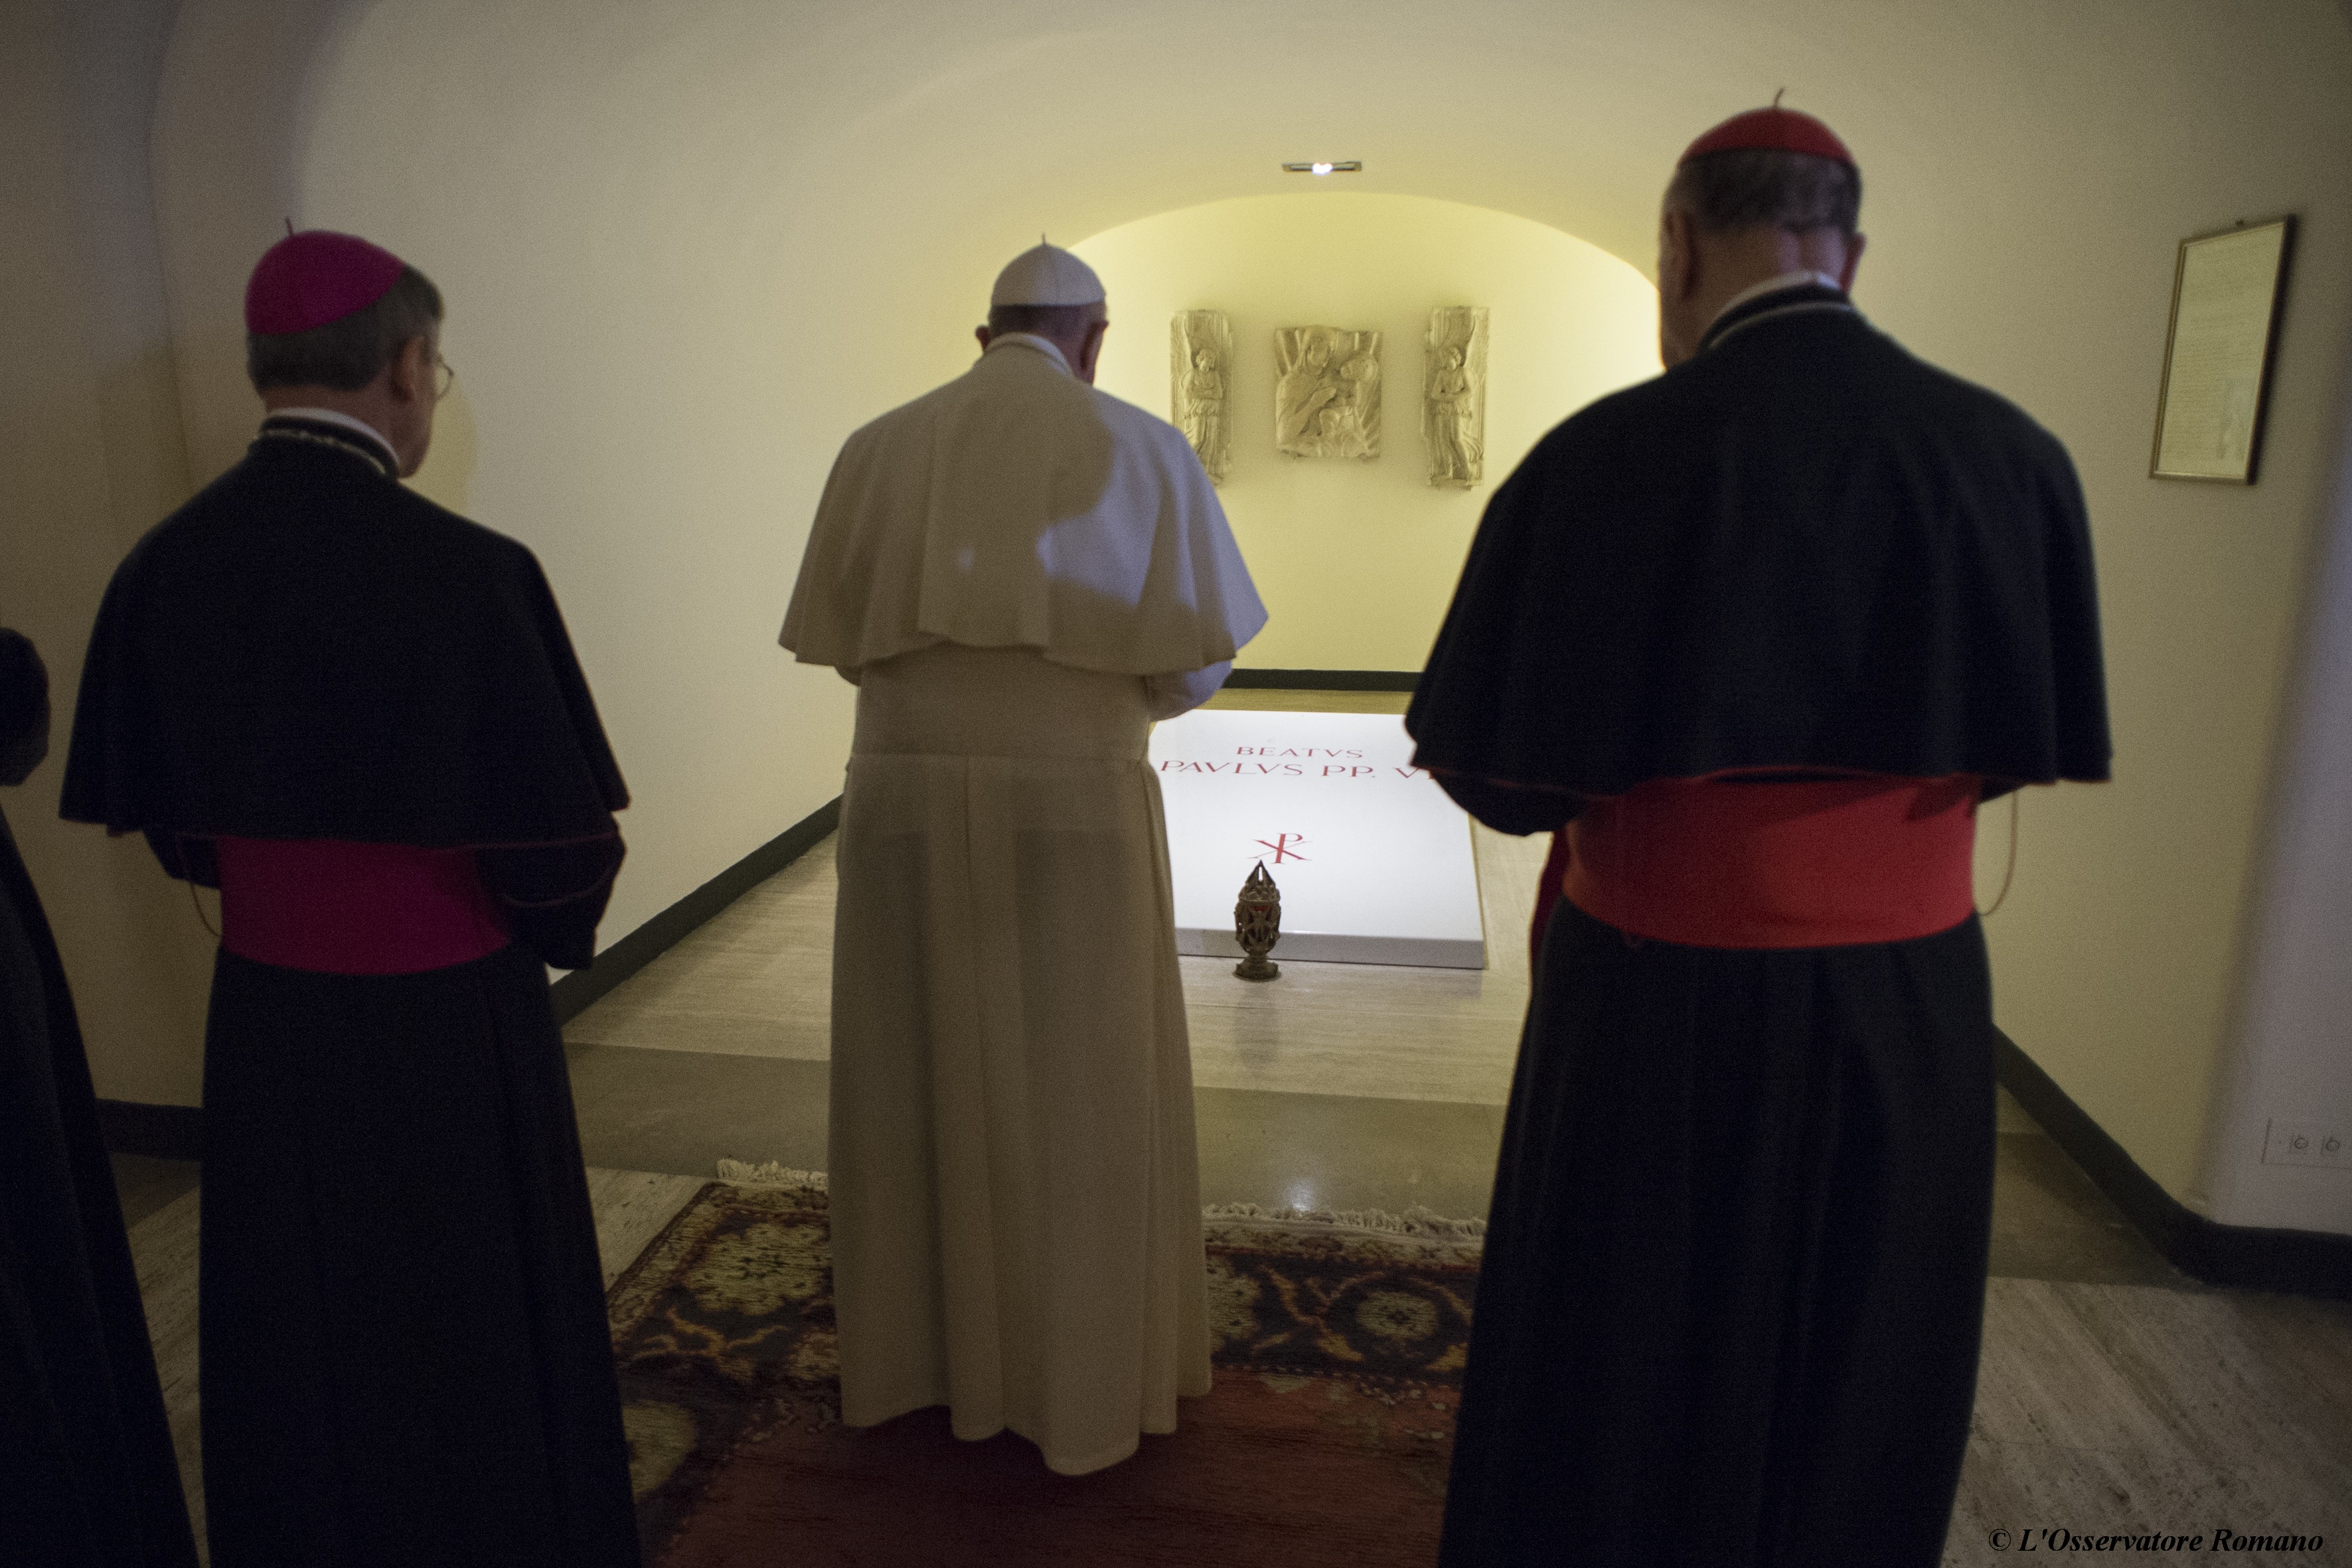 Pope Francis visits the crypt under St. Peter's Basilica to pray privately for the repose of the souls of his predecessors who have passed away